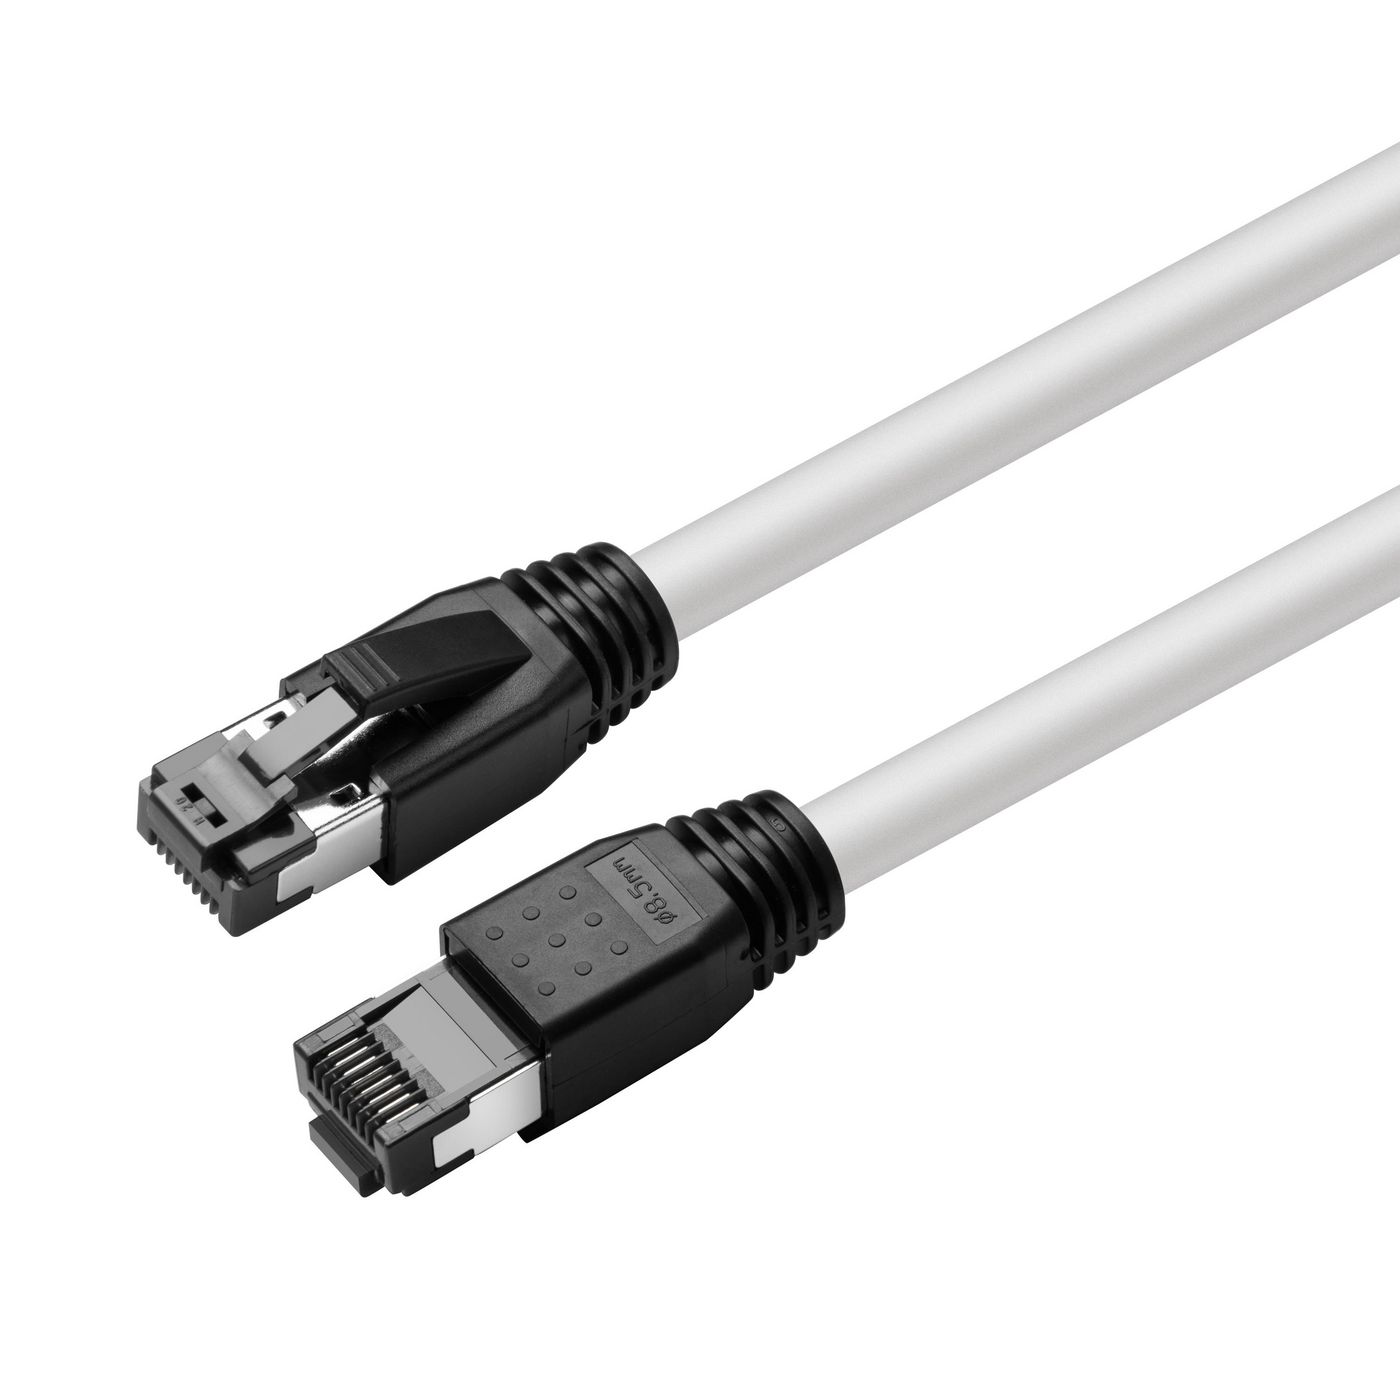 Patch Cable - Cat 8.1 - S/ftp -10m - White